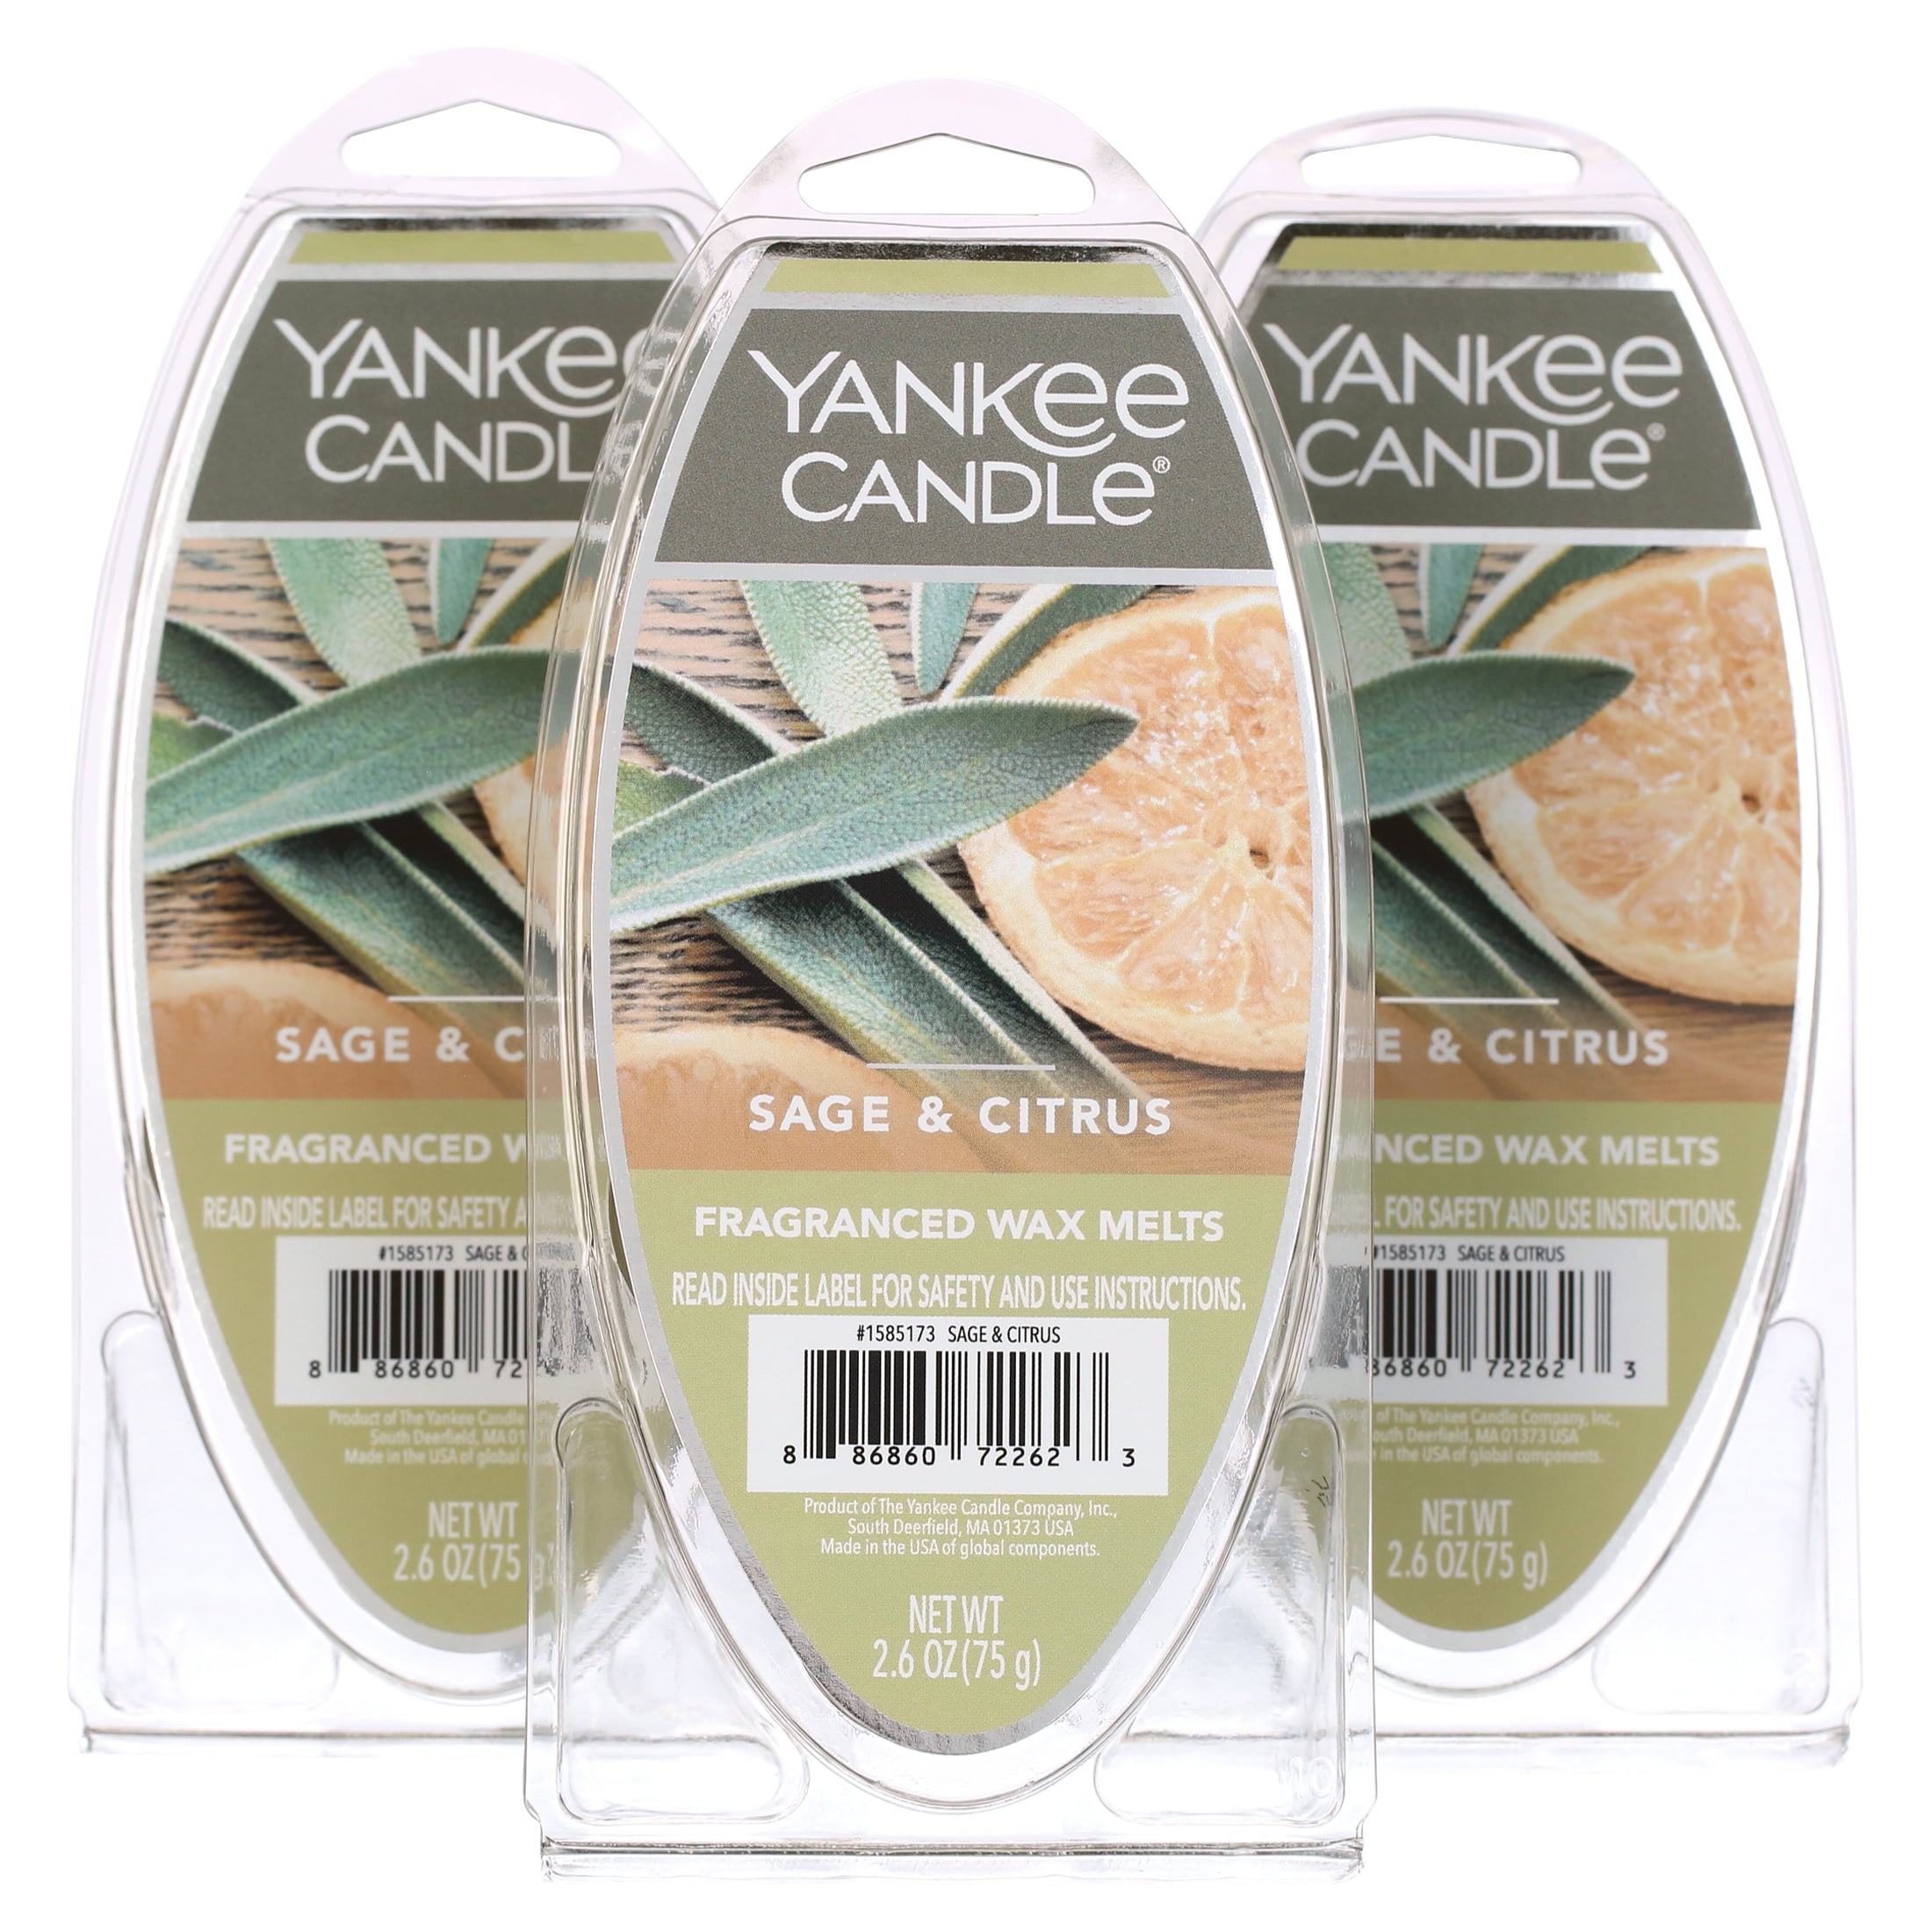 Can You Use Other Wax Melts In A Yankee Candle Warmer? – Serathena